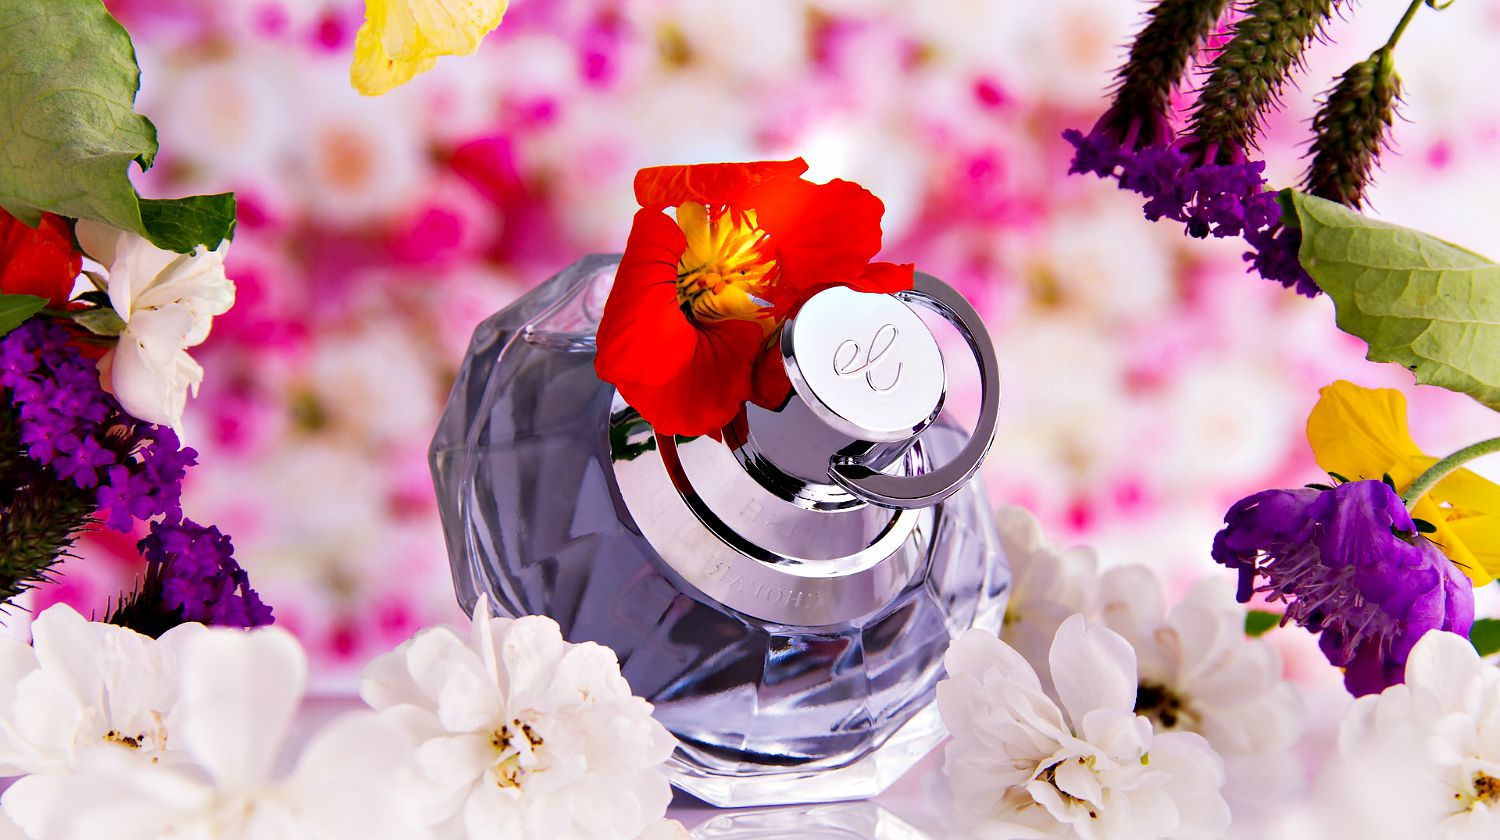 Featured | Bottle glass perfume beside different flowers | DIY Perfume Ideas | Create Your Own Unique Signature Scent